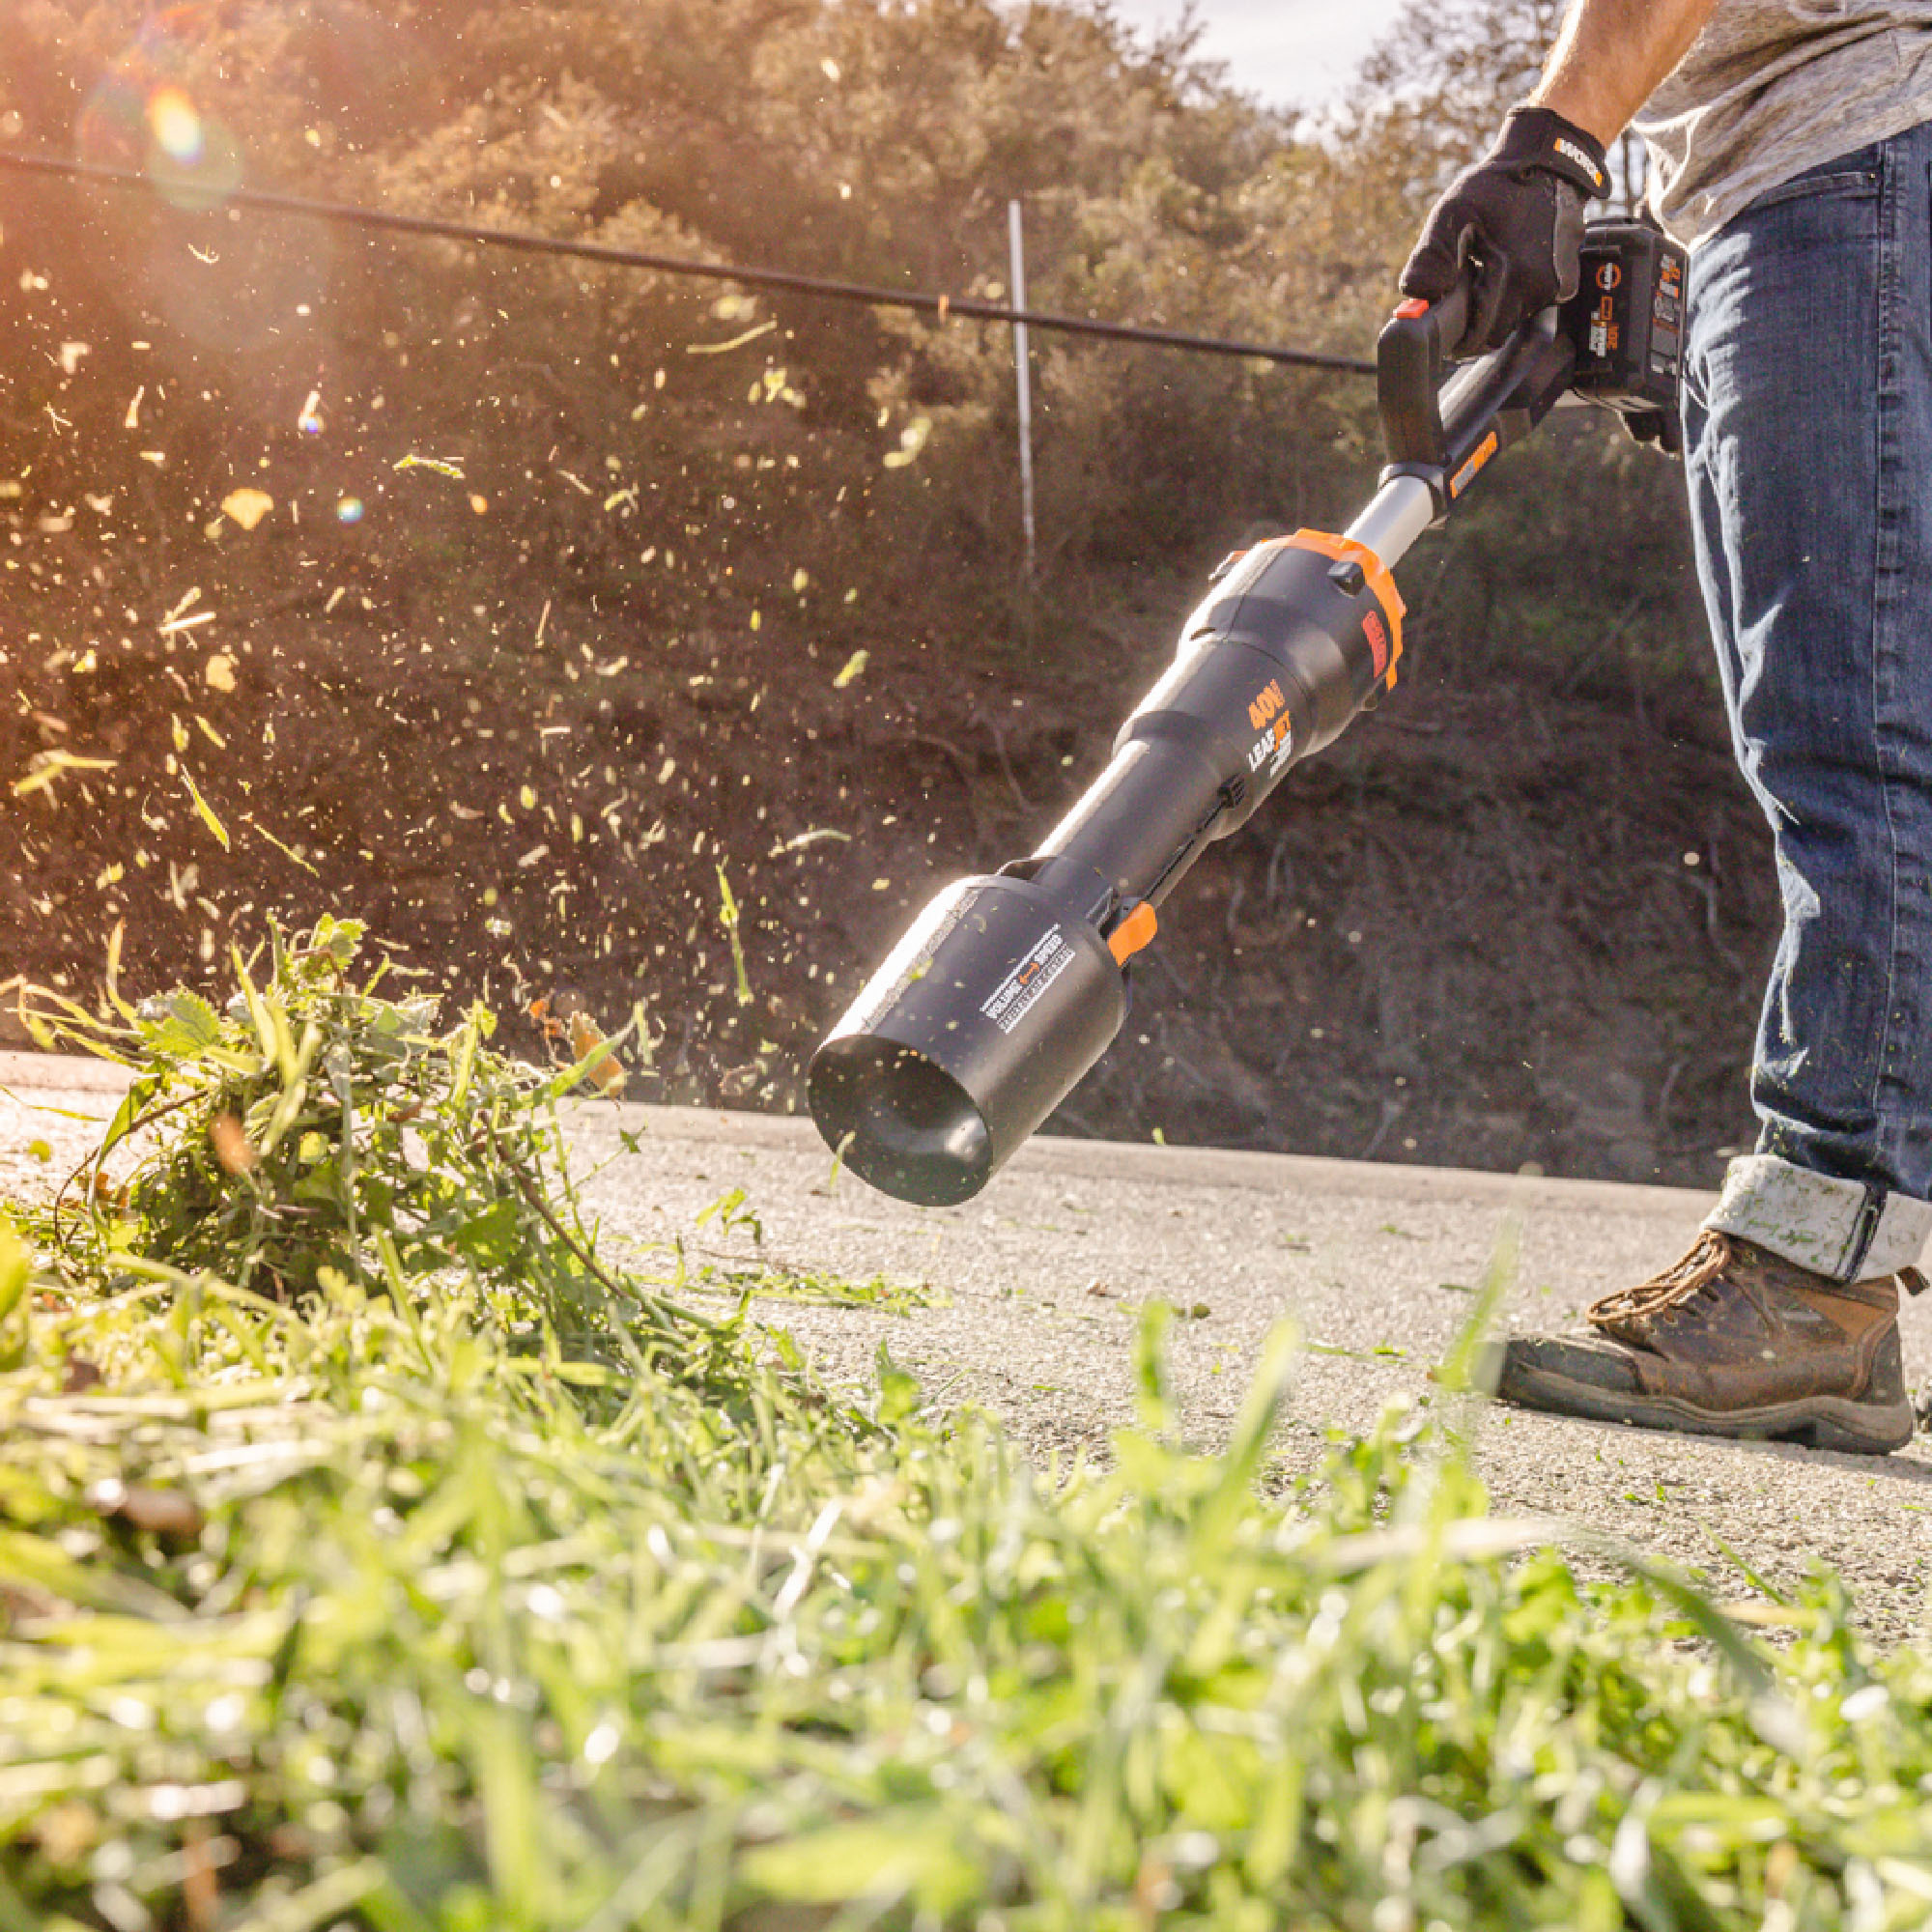 The WORX Nitro 40V Leafjet Blower enables homeowners to instantly choose between high air speed and high air volume to clear leaves and debris.